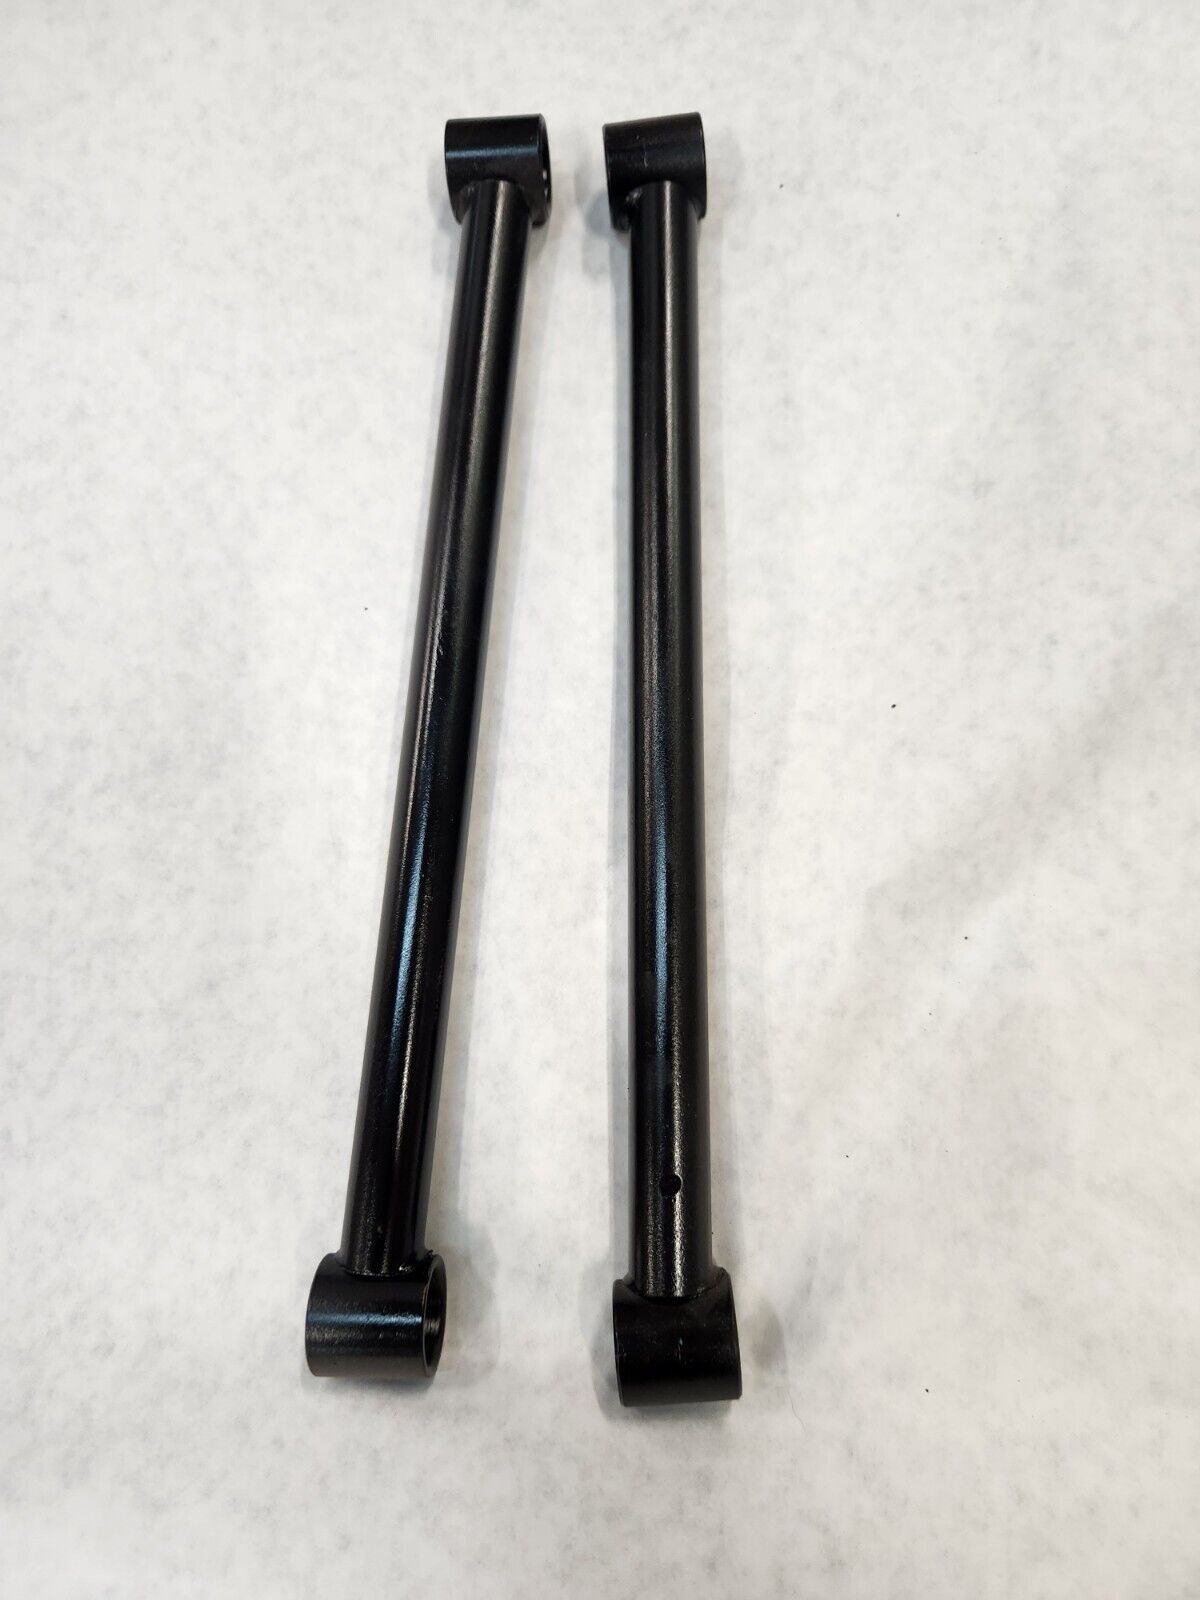 Triumph Spitfire 1972 - 1980 Long Original Rear Radius Rods Arms Used Cleaned Up